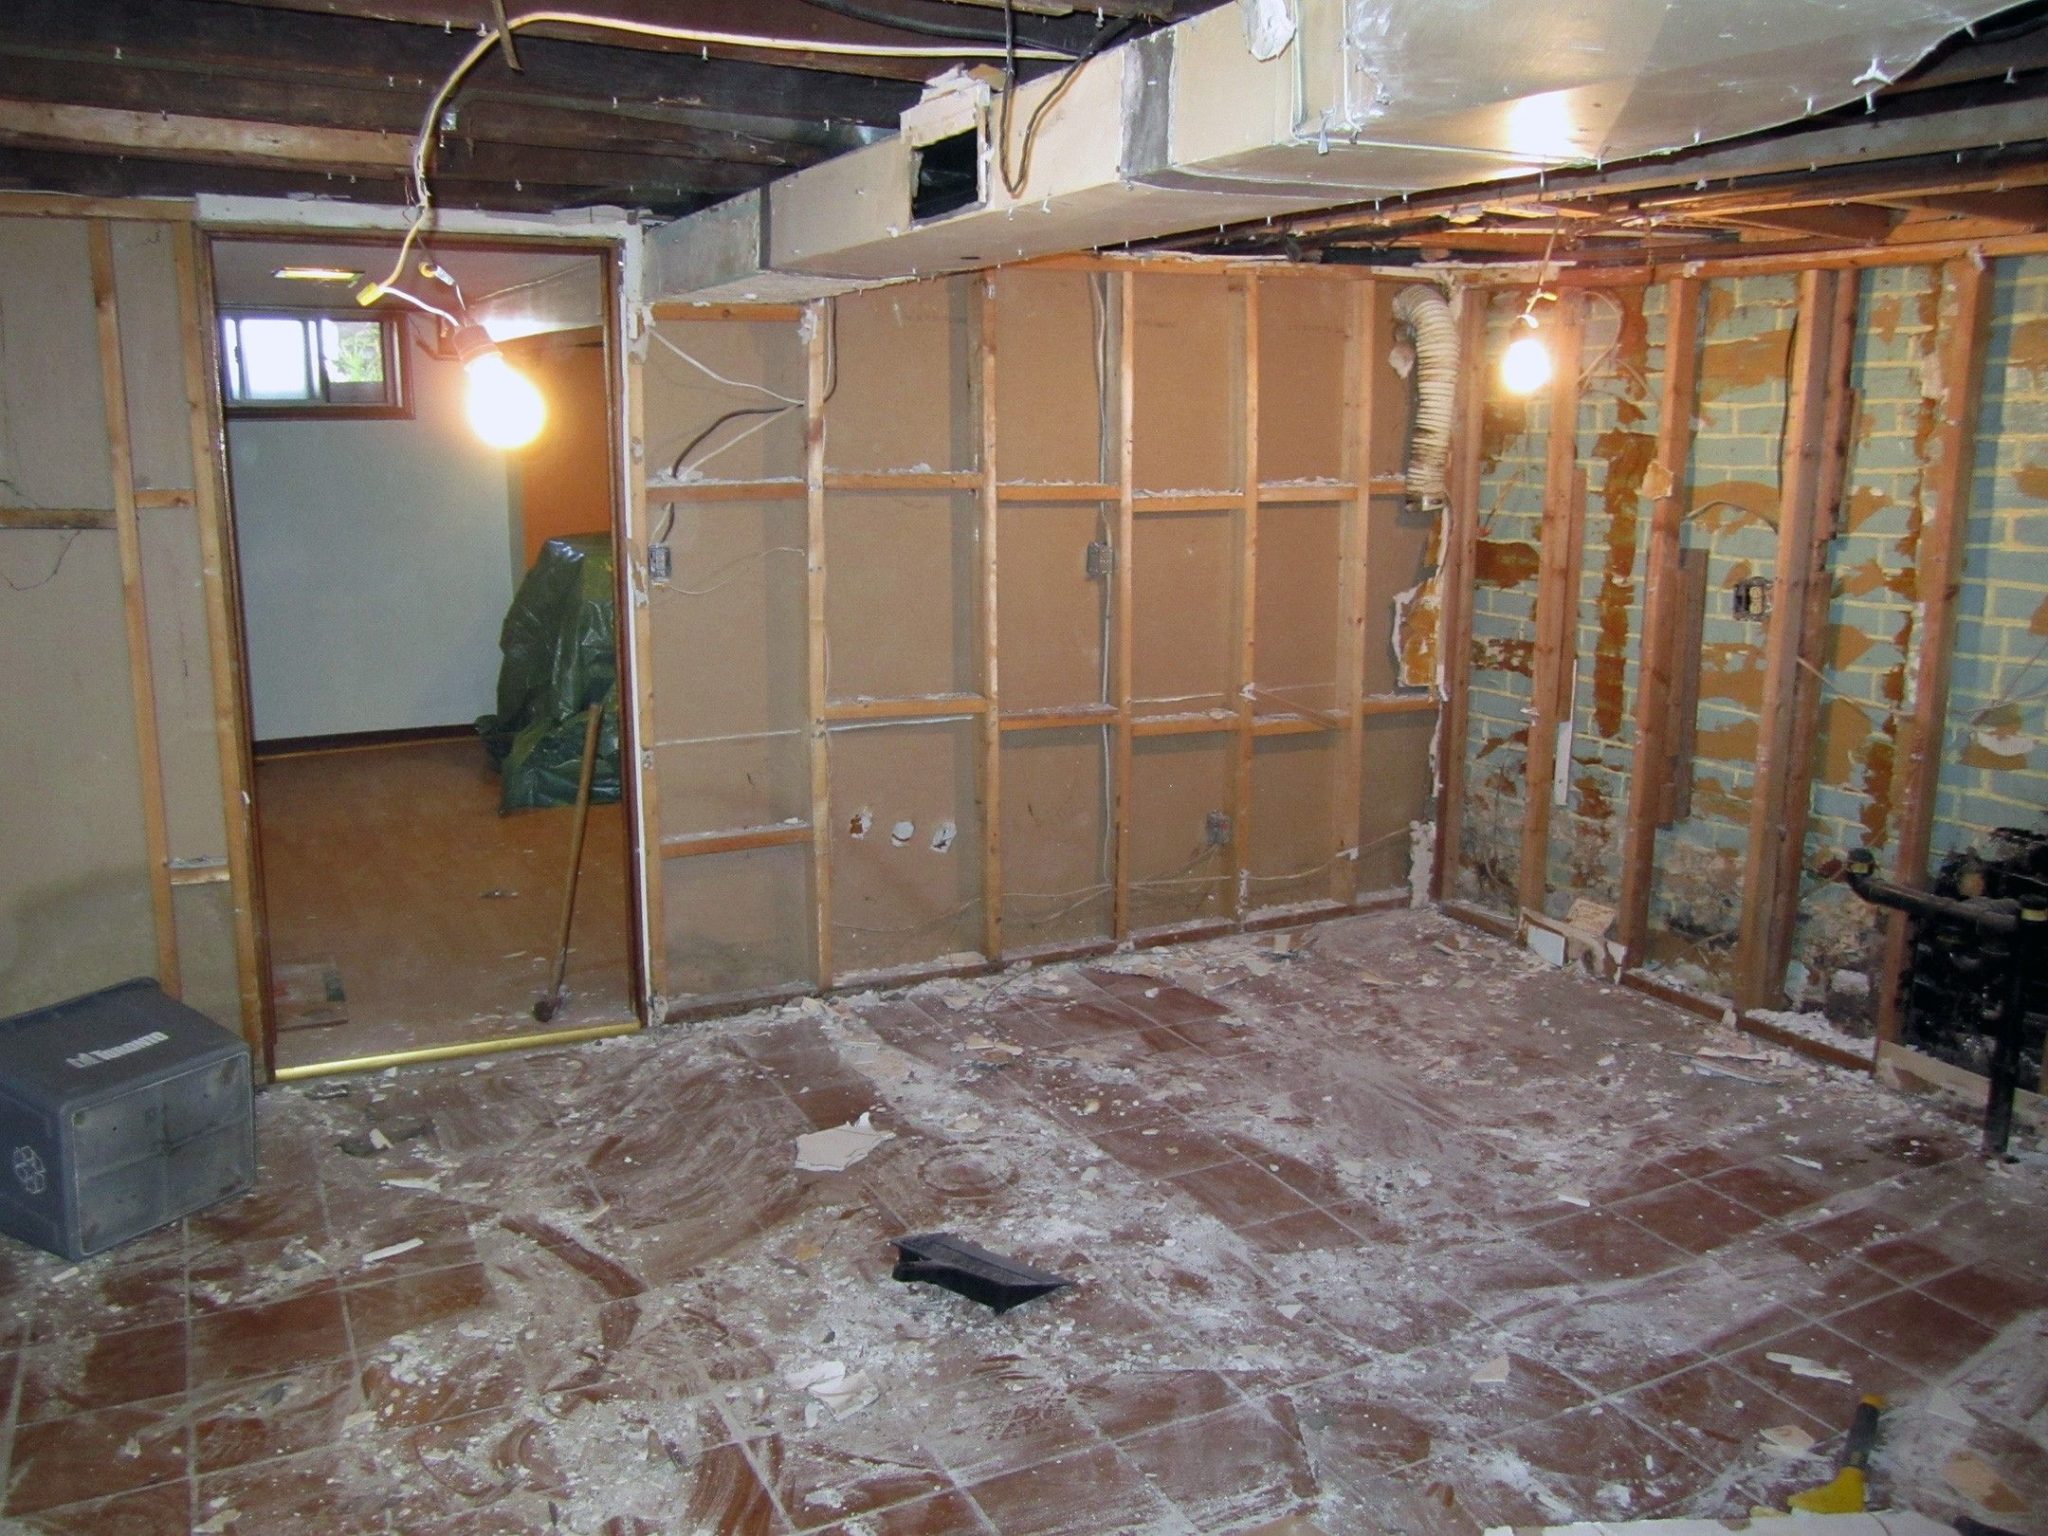 demolition during basement remodel. Exposed ventilation systems, studs, plumbing, and electrical.